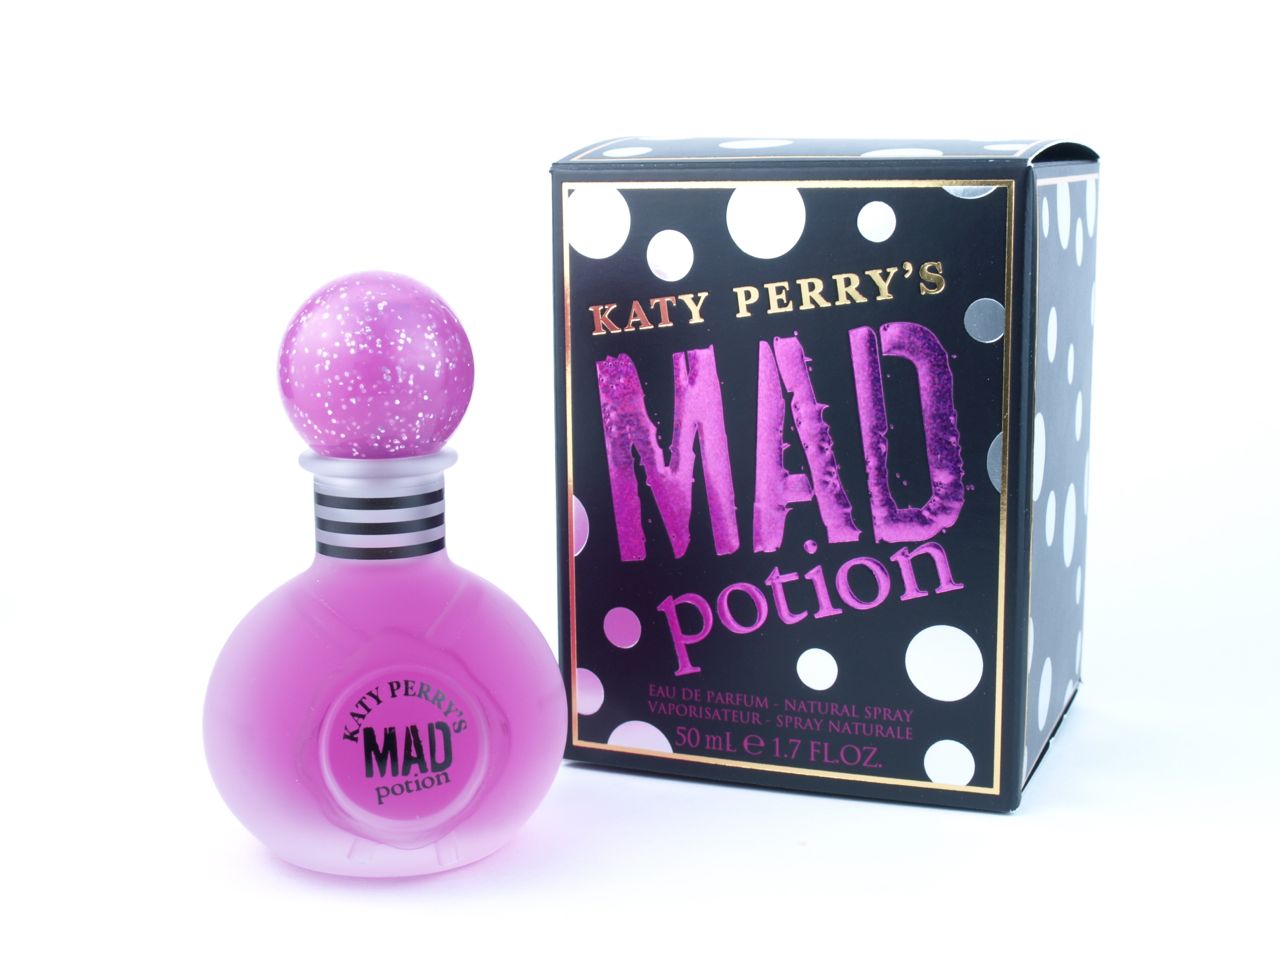 KATY PERRY KATY PERRY'S MAD POTION